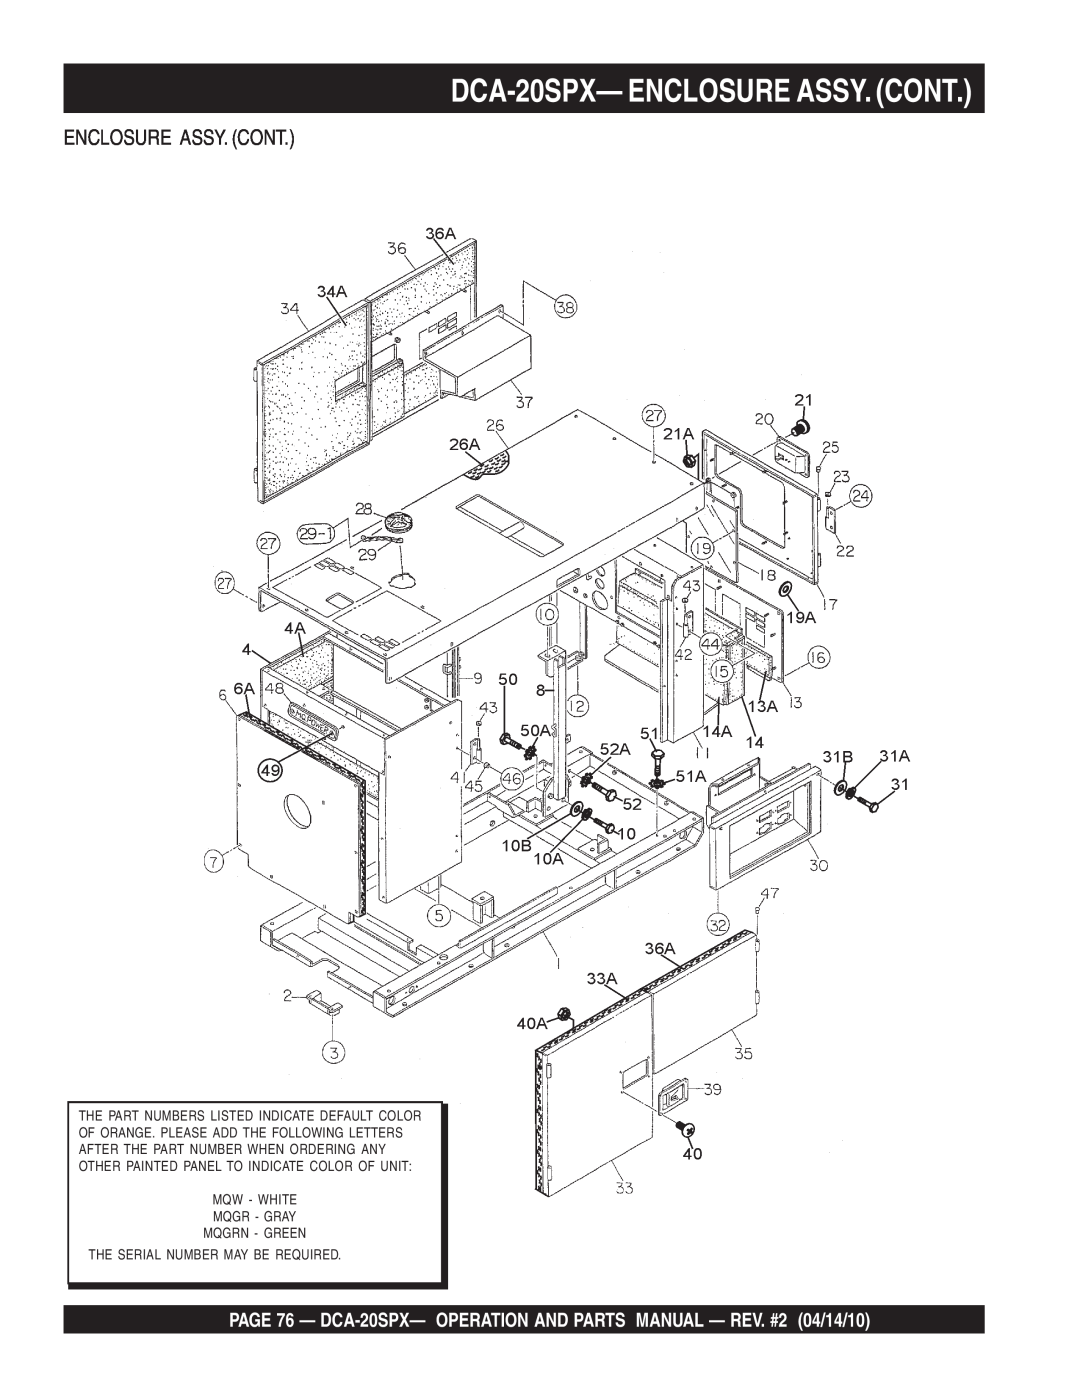 Multiquip DCA-20SPX- ENCLOSURE ASSY. CONT, PAGE 76 - DCA-20SPX- OPERATION AND PARTS MANUAL - REV. #2 04/14/10 